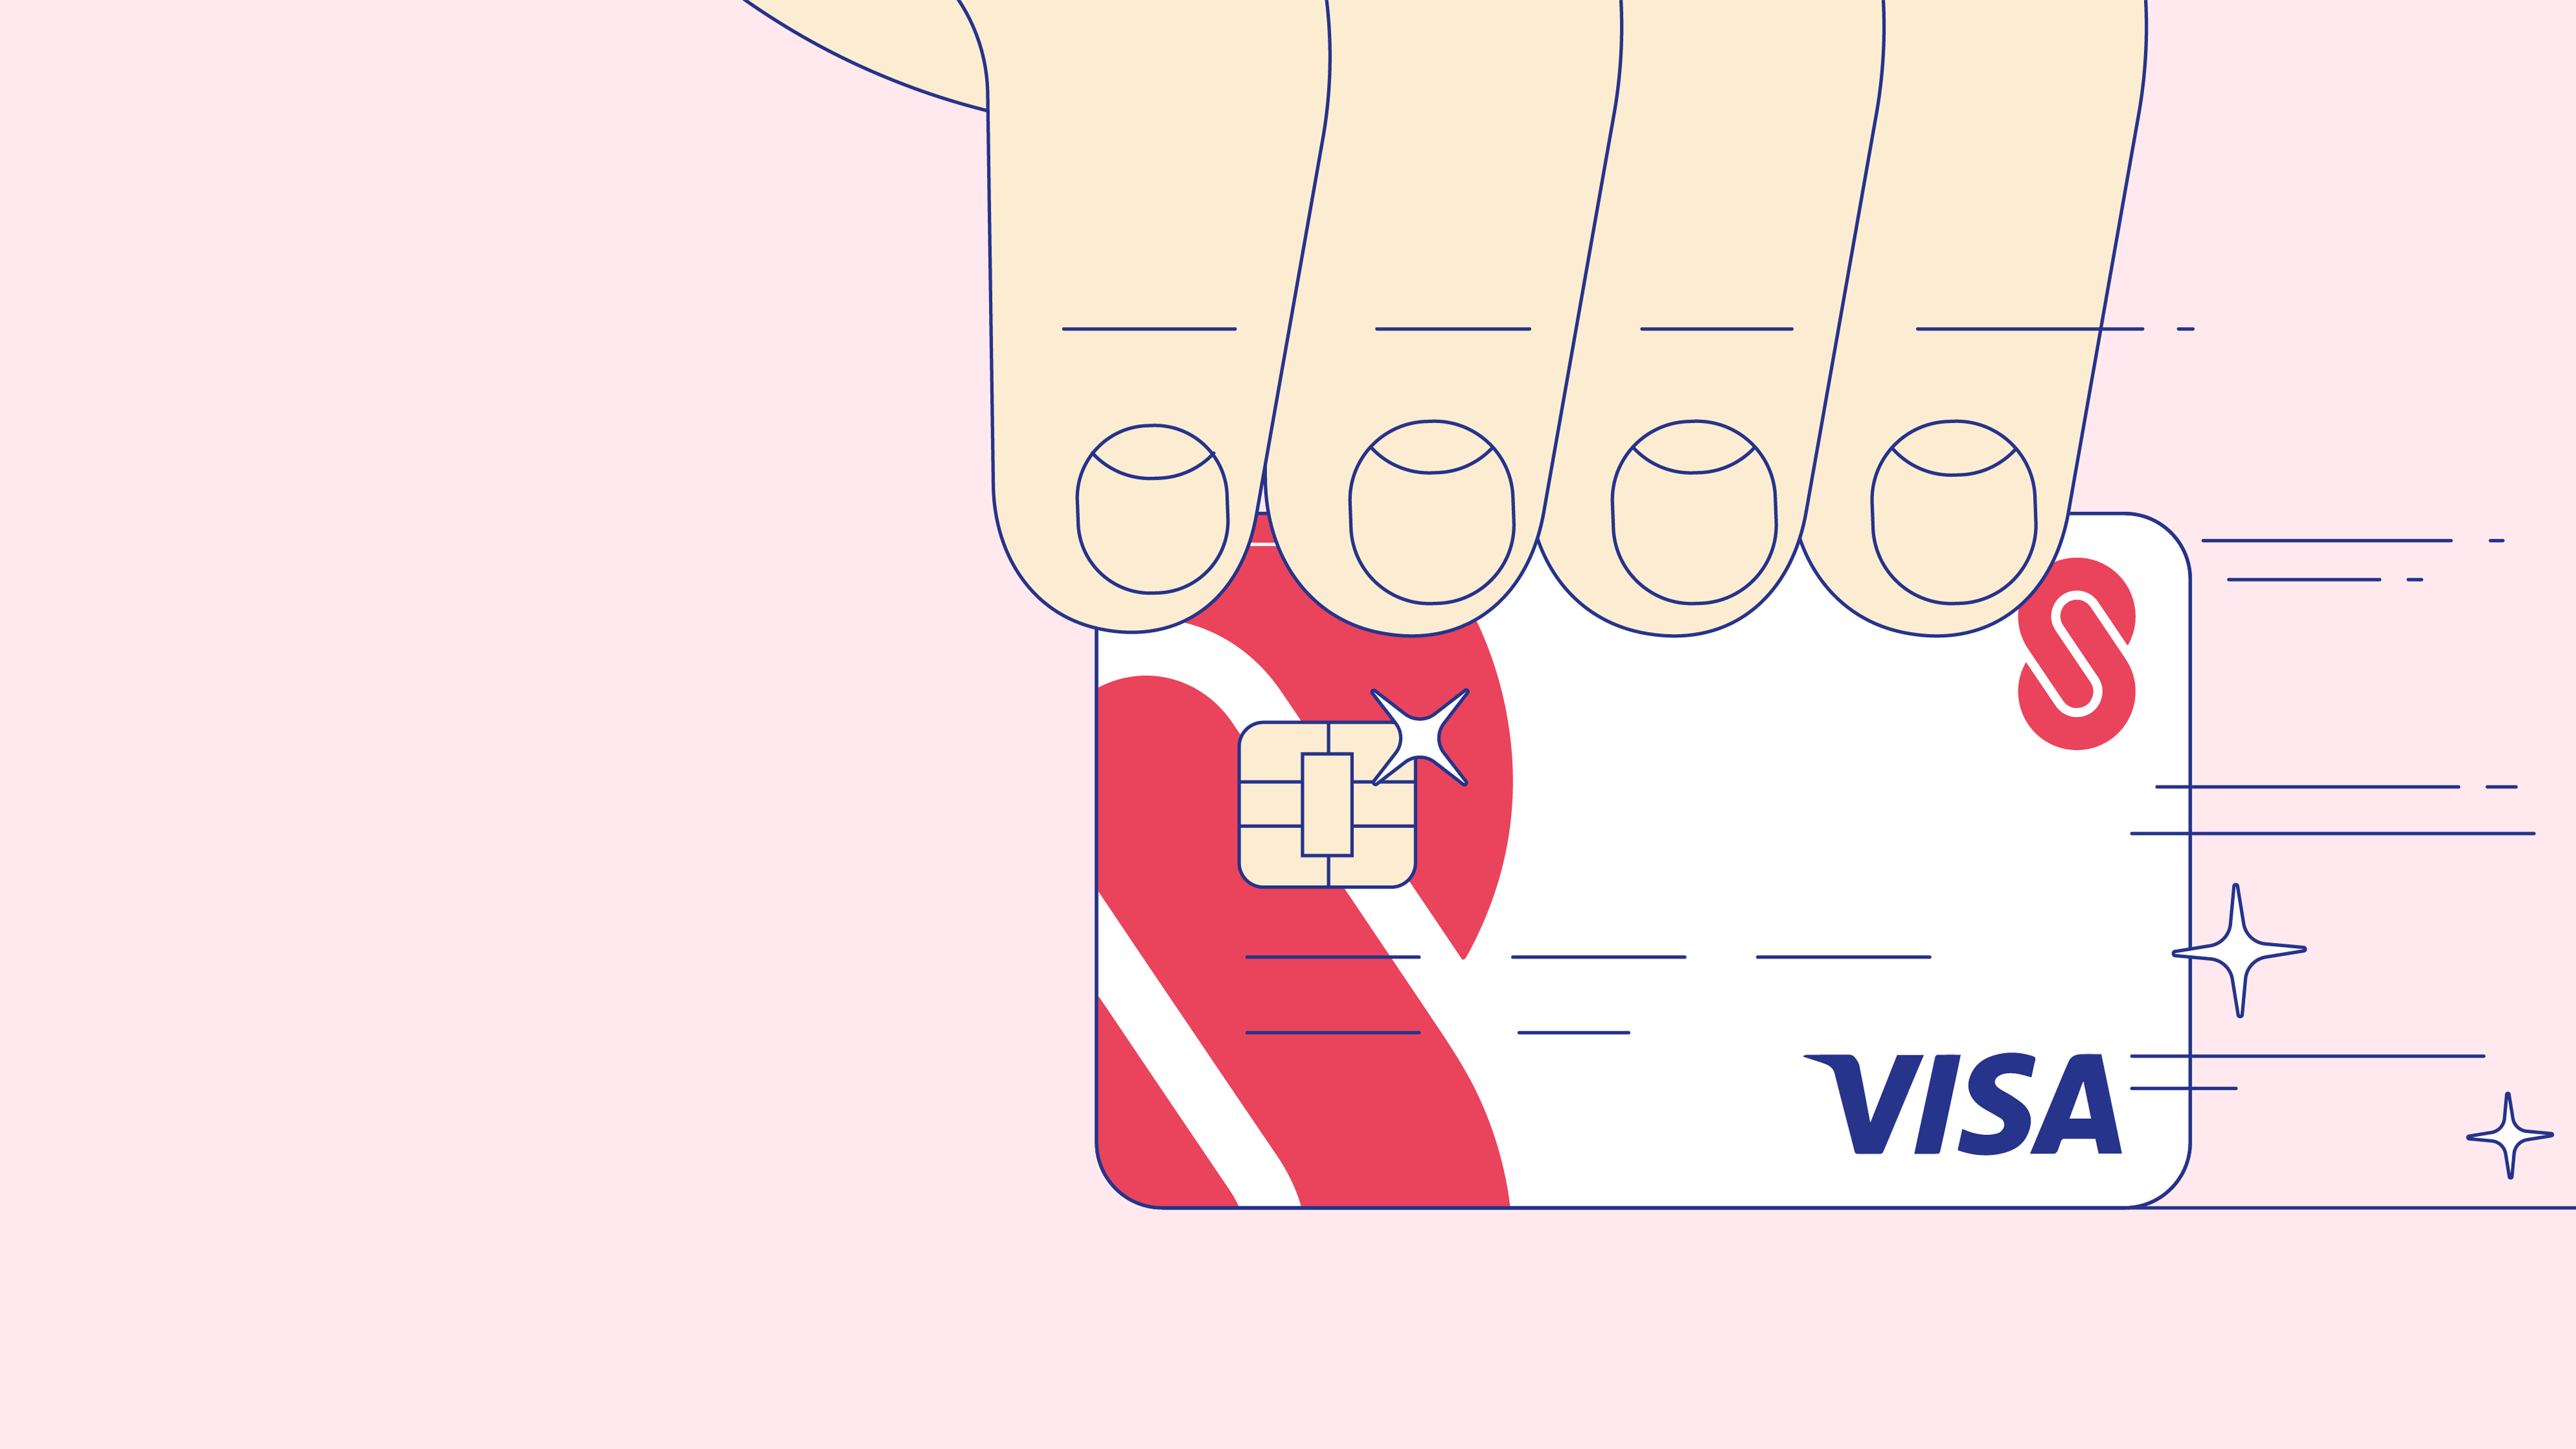 Musclebeaver-Visa-Card-06-Payment-Illustration-Animation